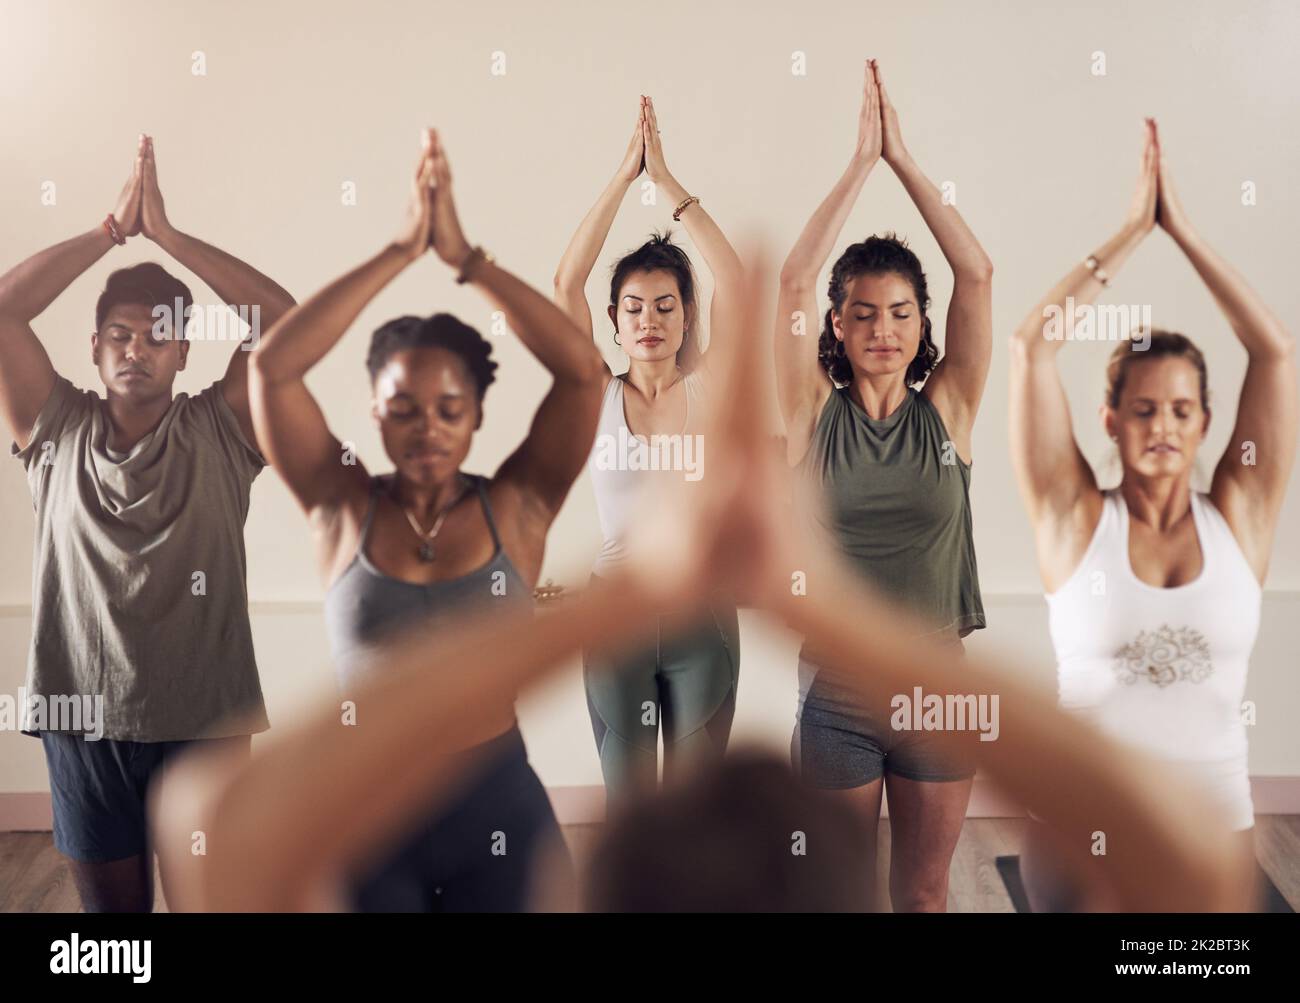 The zen is in the air. Shot of a group of young people working out together in a yoga class. Stock Photo